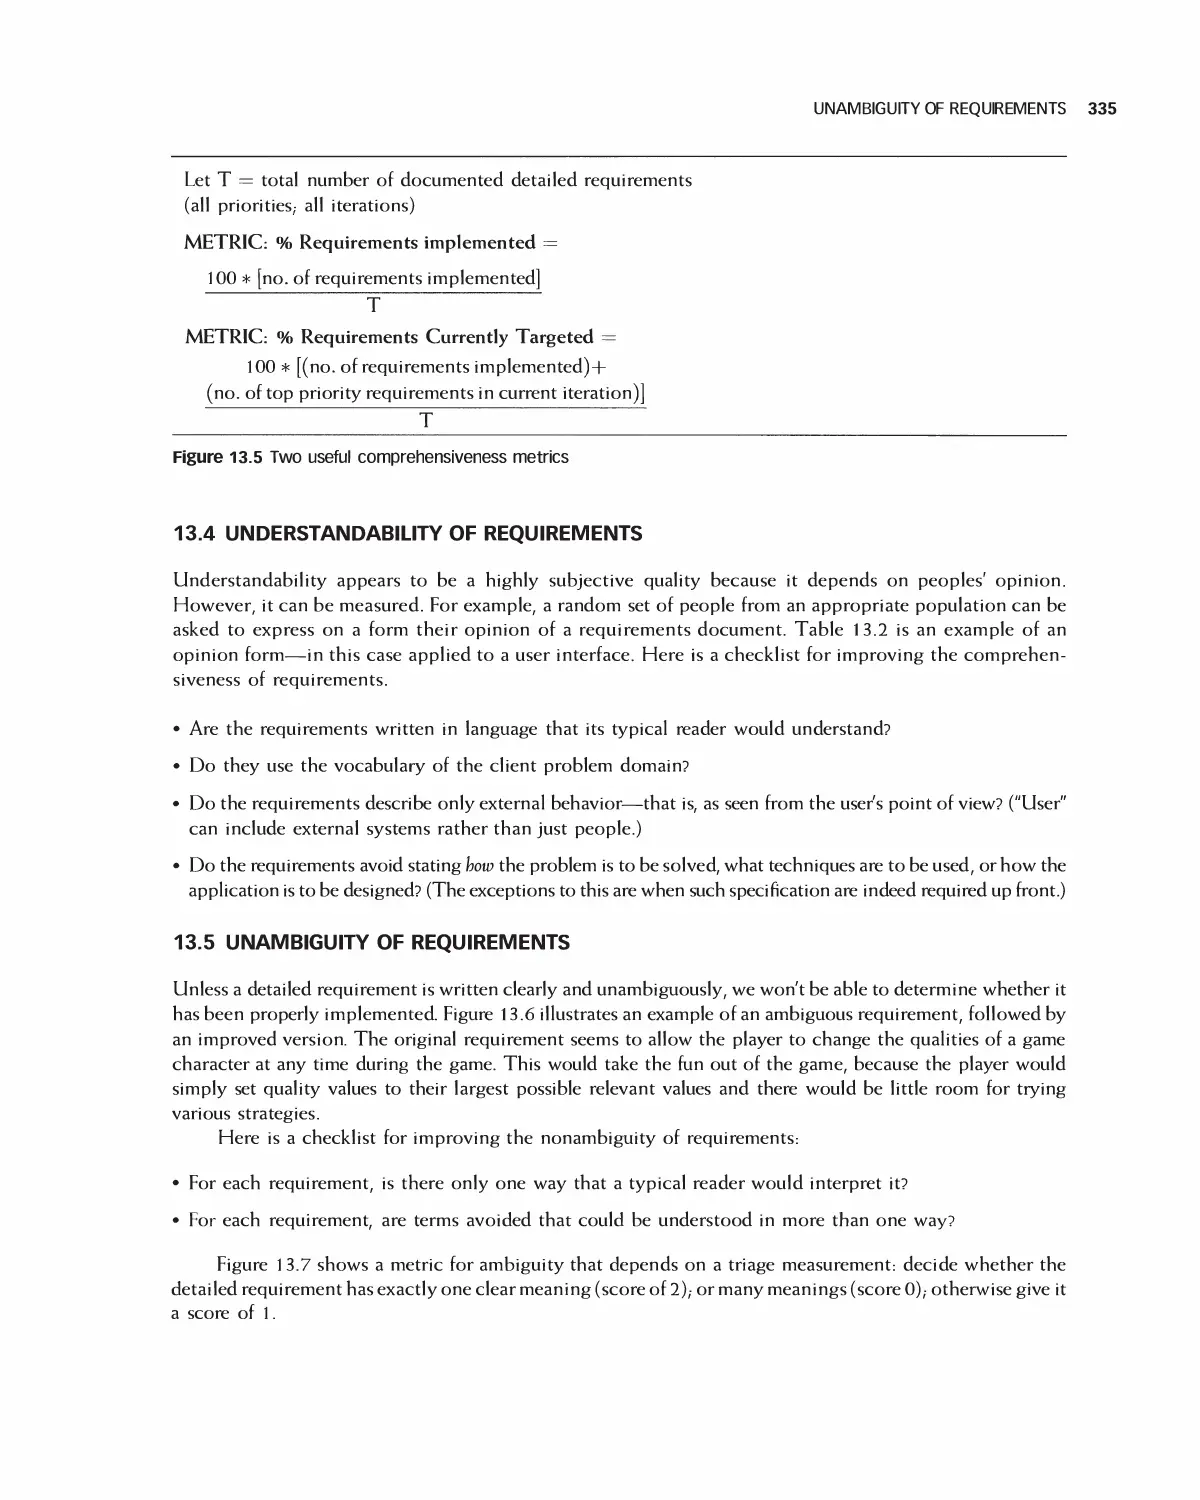 13.4 Understandability of Requirements
13.5 Unambiguity of Requirements